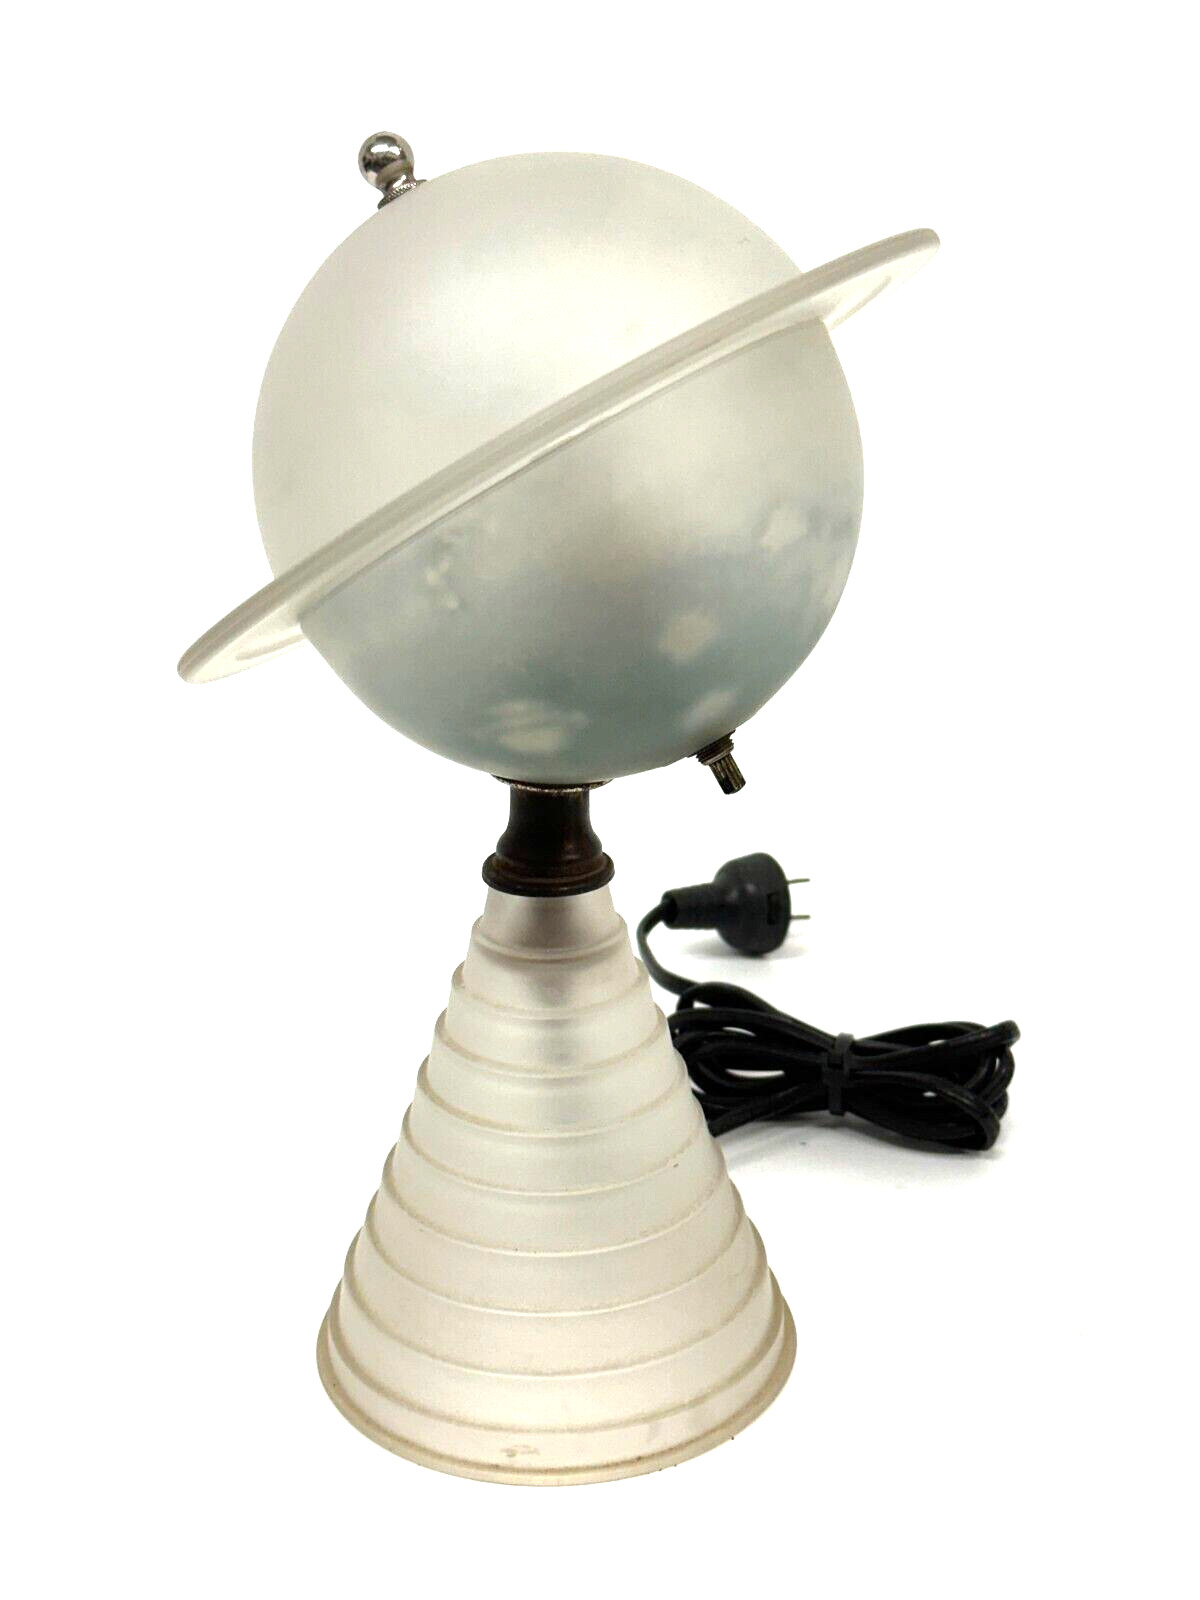 Vintage Art Deco 1939 Worlds Fair Frosted White Glass with Blue Saturn Lamp